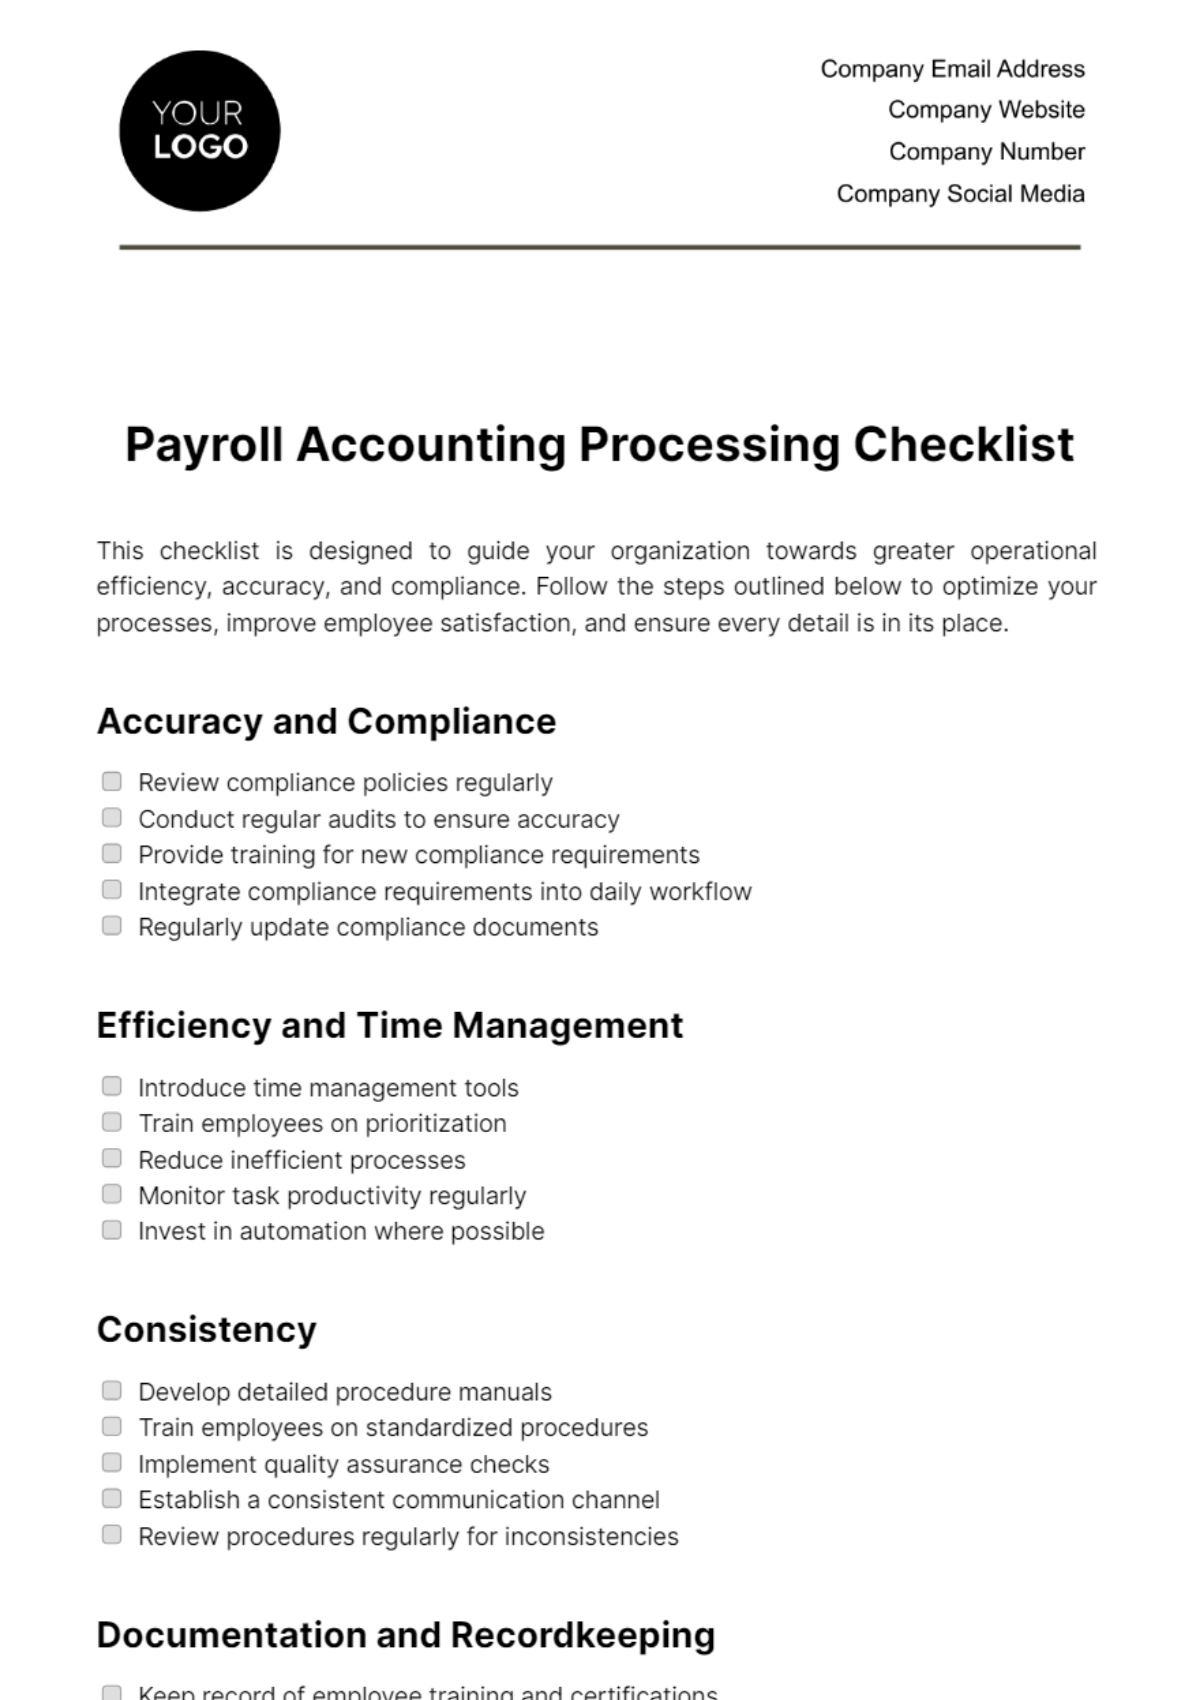 Payroll Accounting Processing Checklist Template